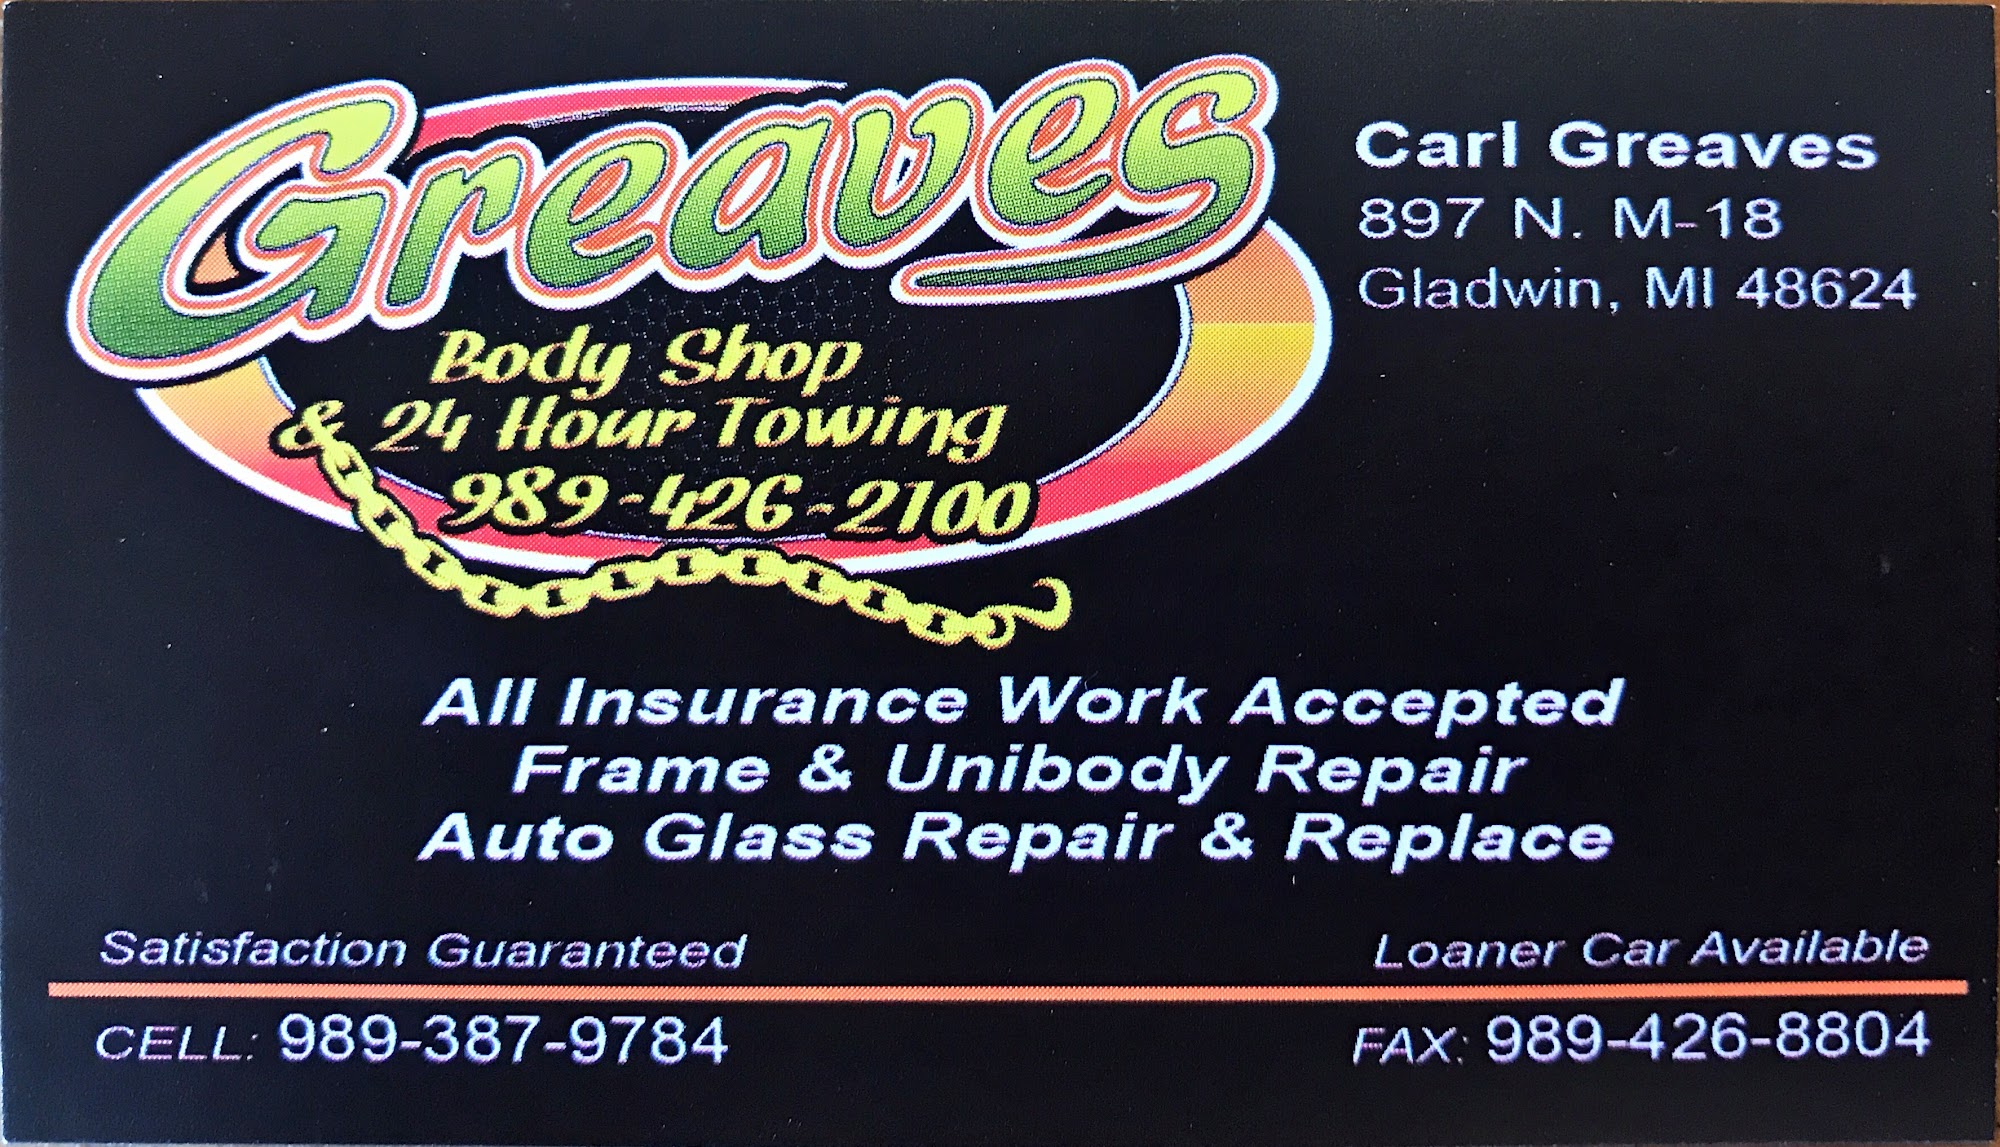 Greaves Body Shop & Towing Inc.